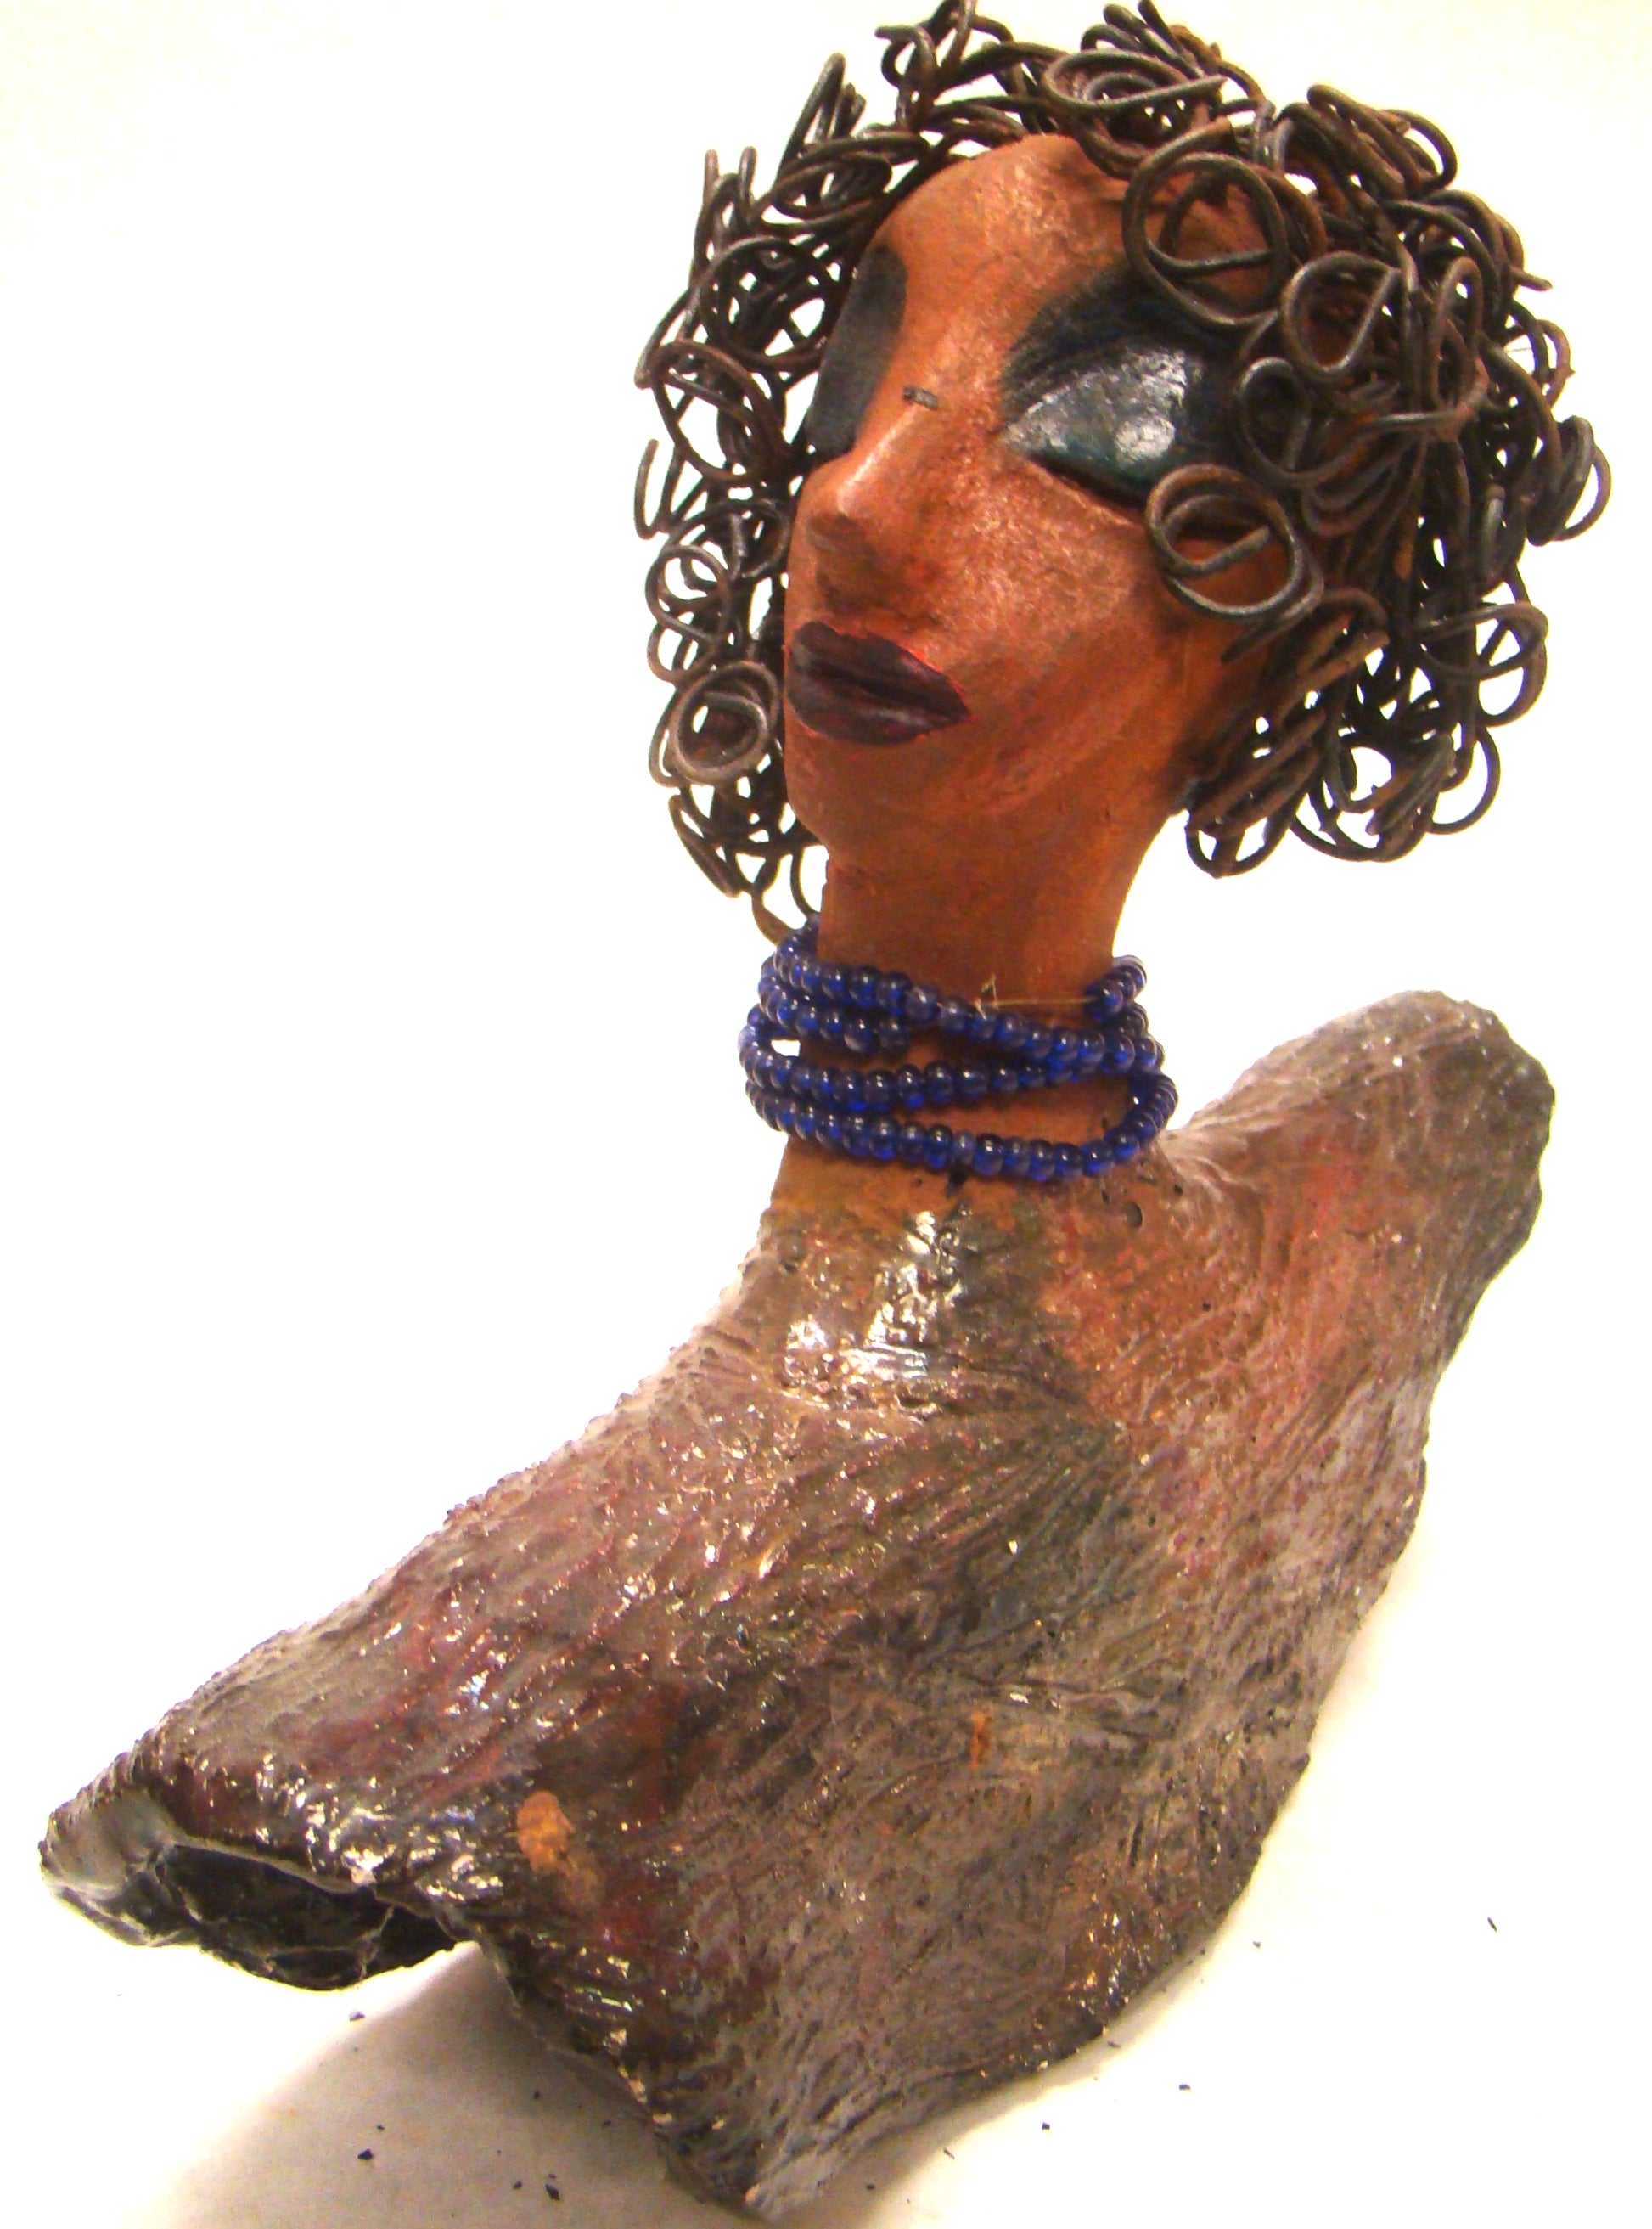 Helen stands 8" x  8" x 3" and weighs 2.06 lbs. She has a lovely honey brown complexion. Helen has a metallic copper glaze on her textured robe. Her blue eye shadow matches the blue strand of beads around her neck. Helen has over 20 feet of curly wire hair. Helen is somewhat angelic! Give Helen a prominent place in your home!